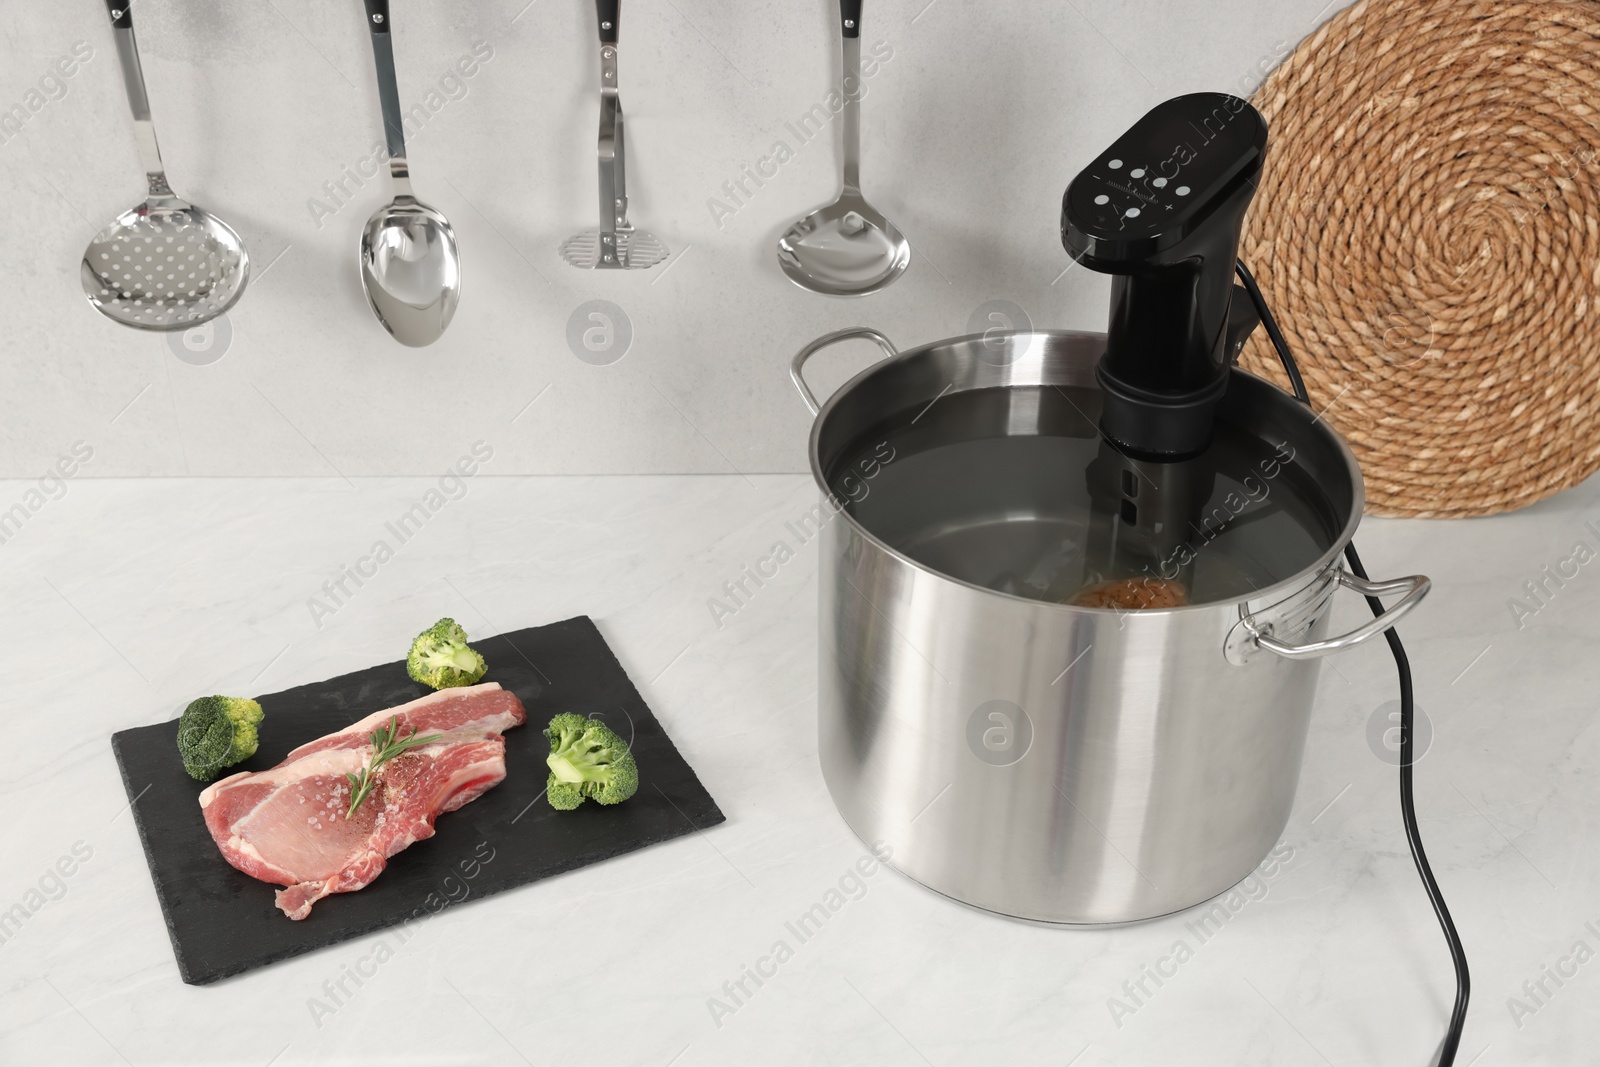 Photo of Pot with sous vide cooker and ingredients on table in kitchen. Thermal immersion circulator